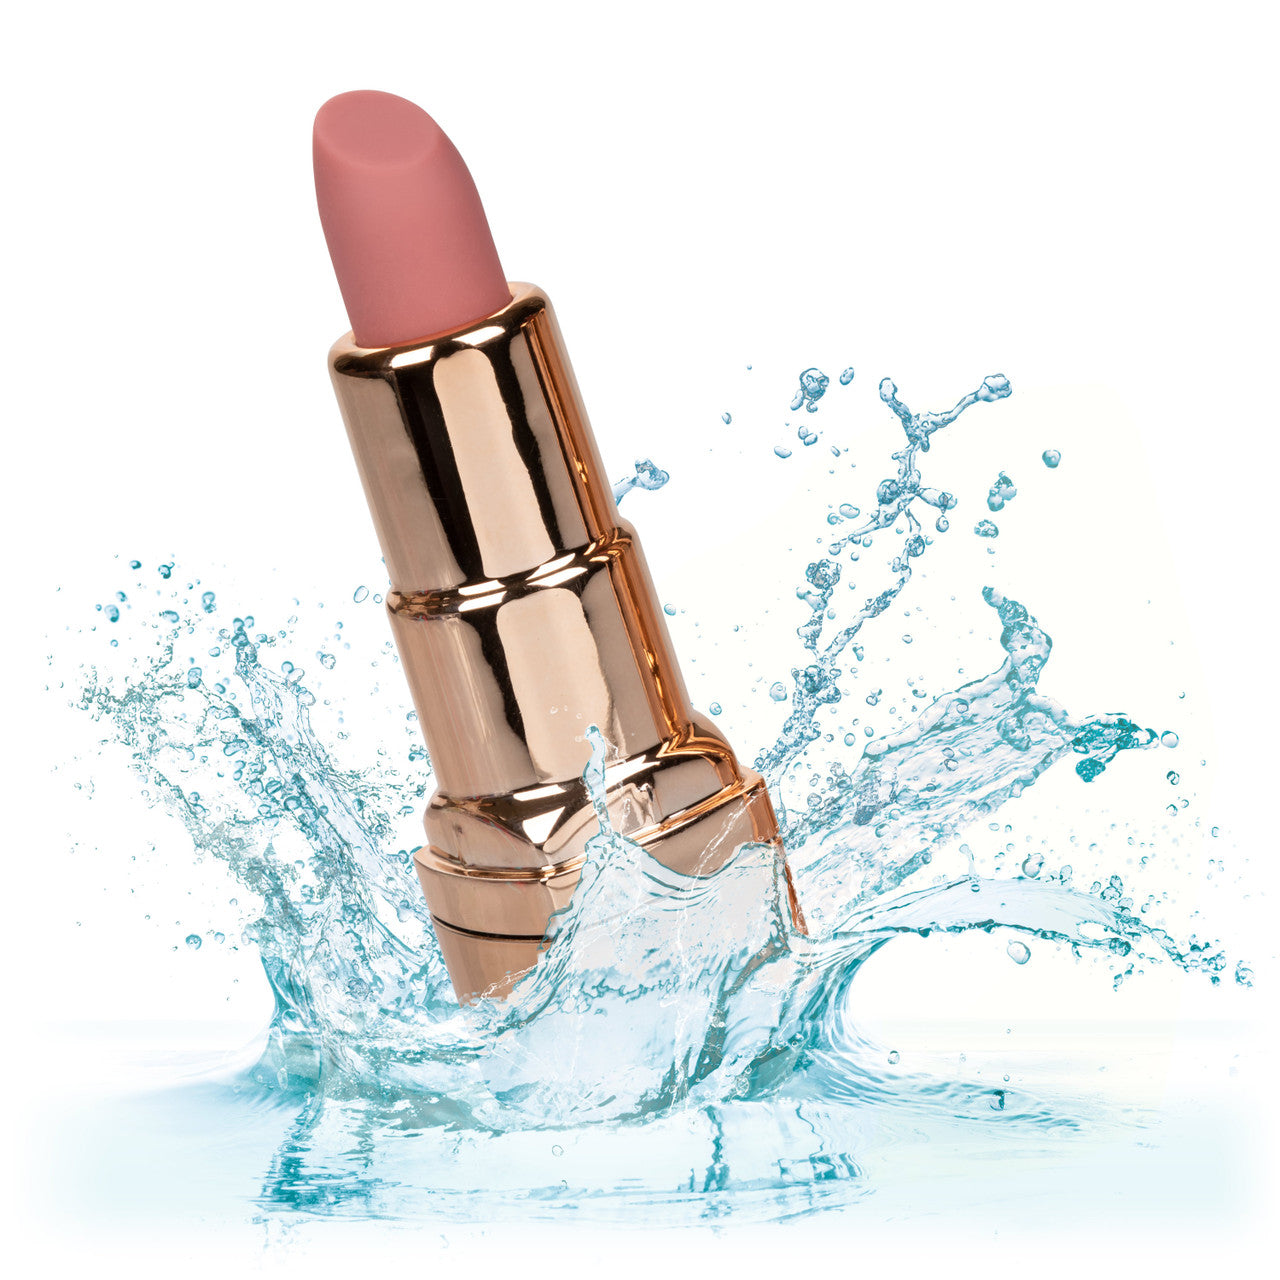 Hide & Play Rechargeable Lipstick Vibrator - Nude